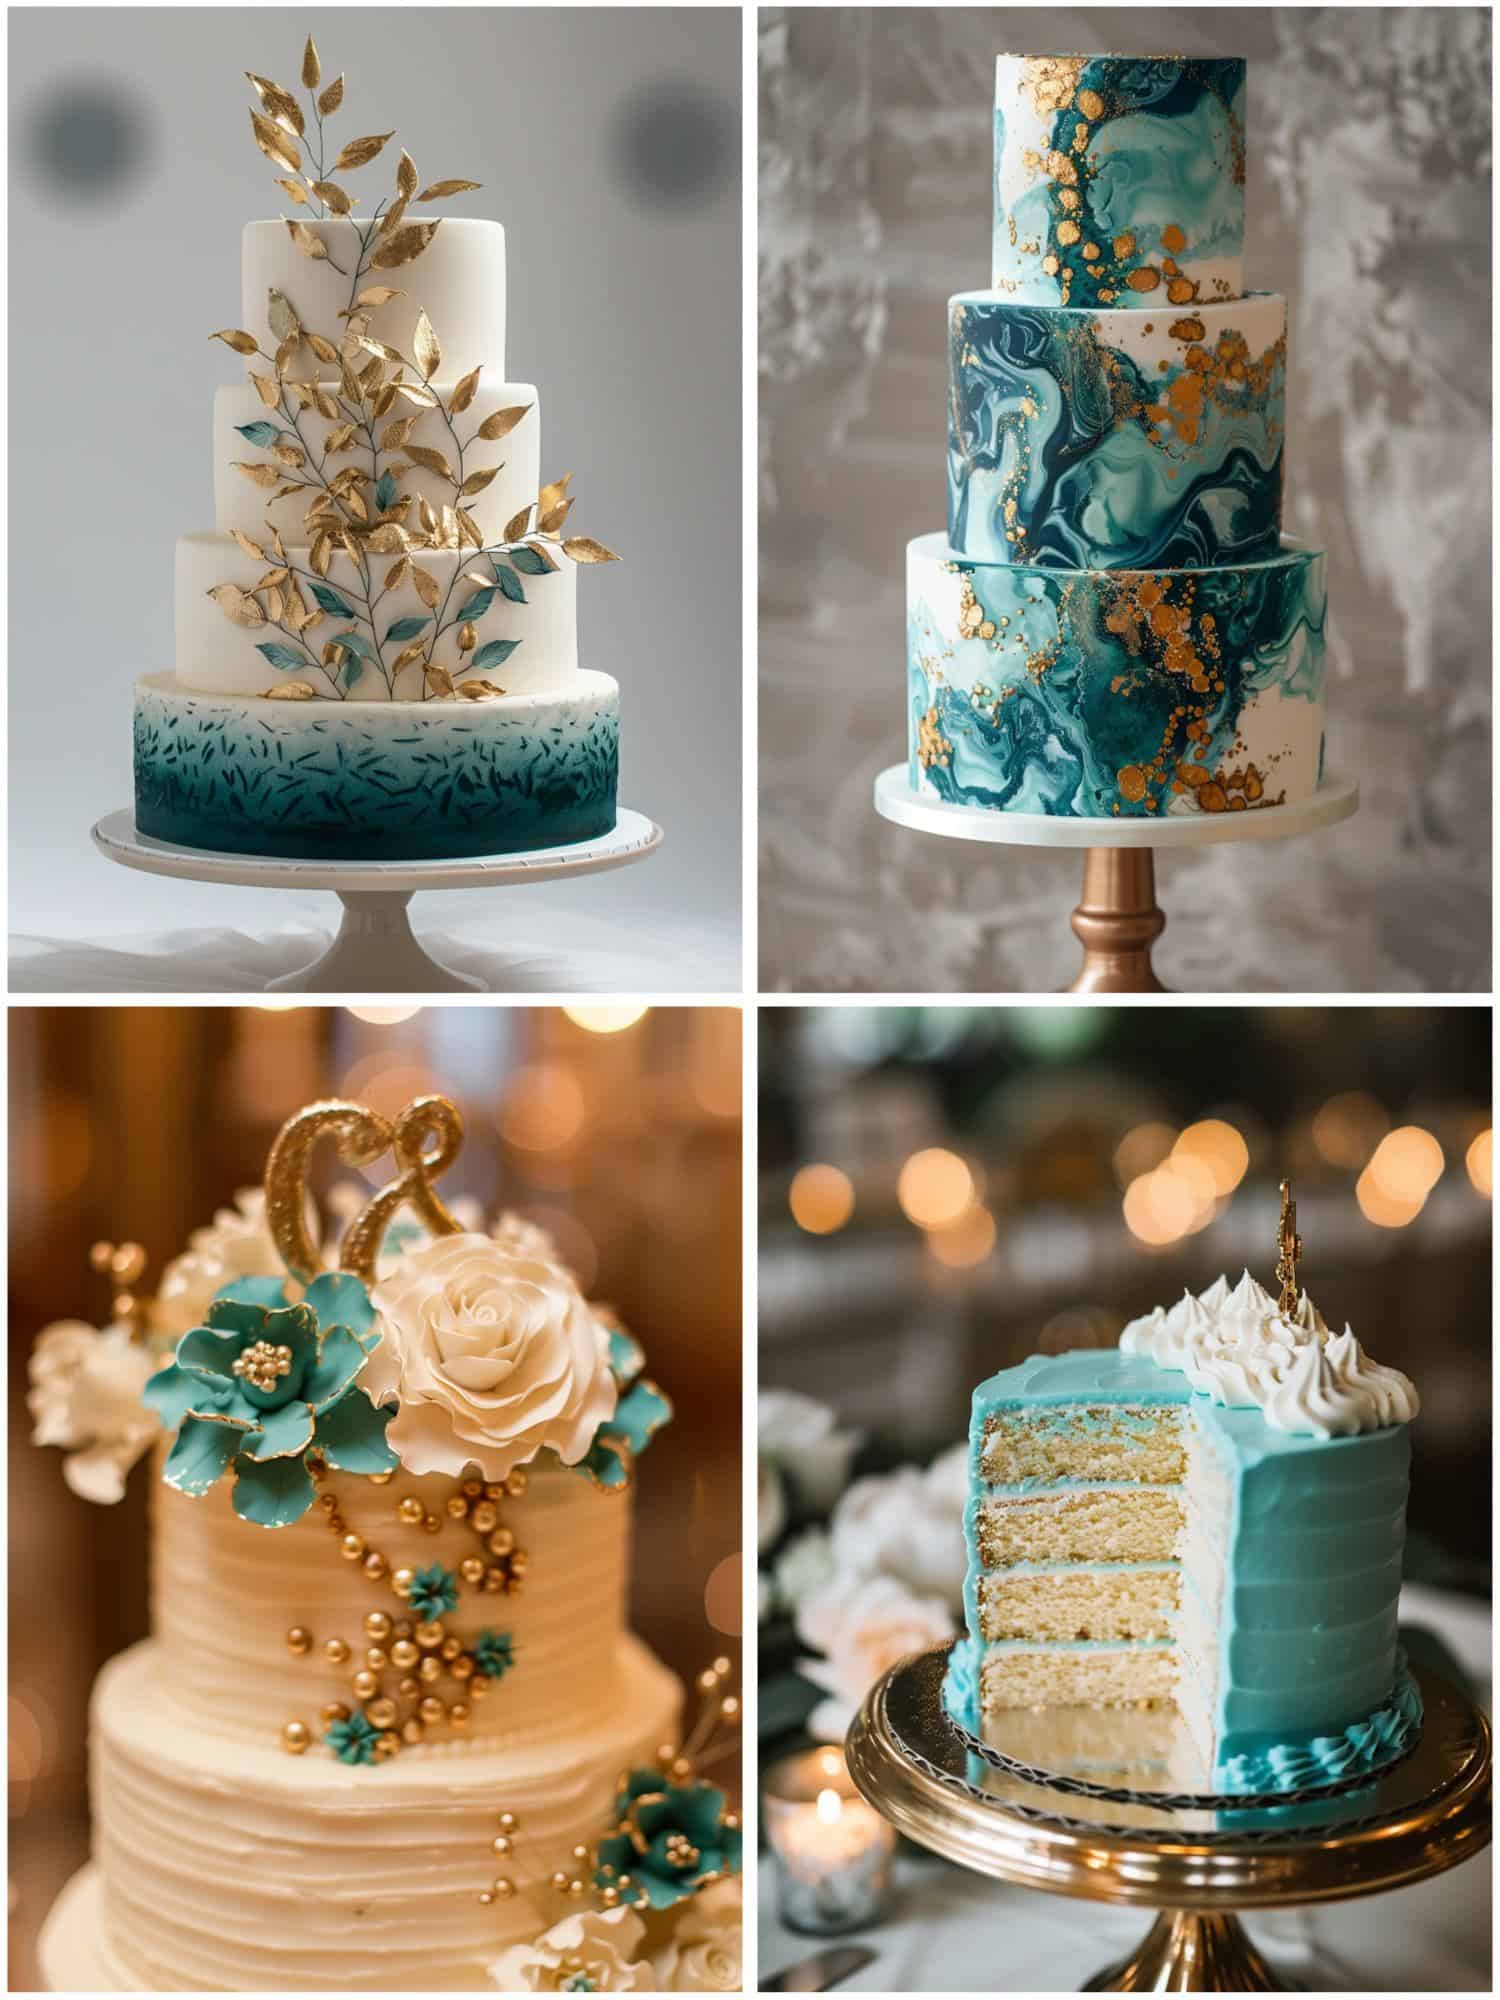 wedding cakes in teal and gold